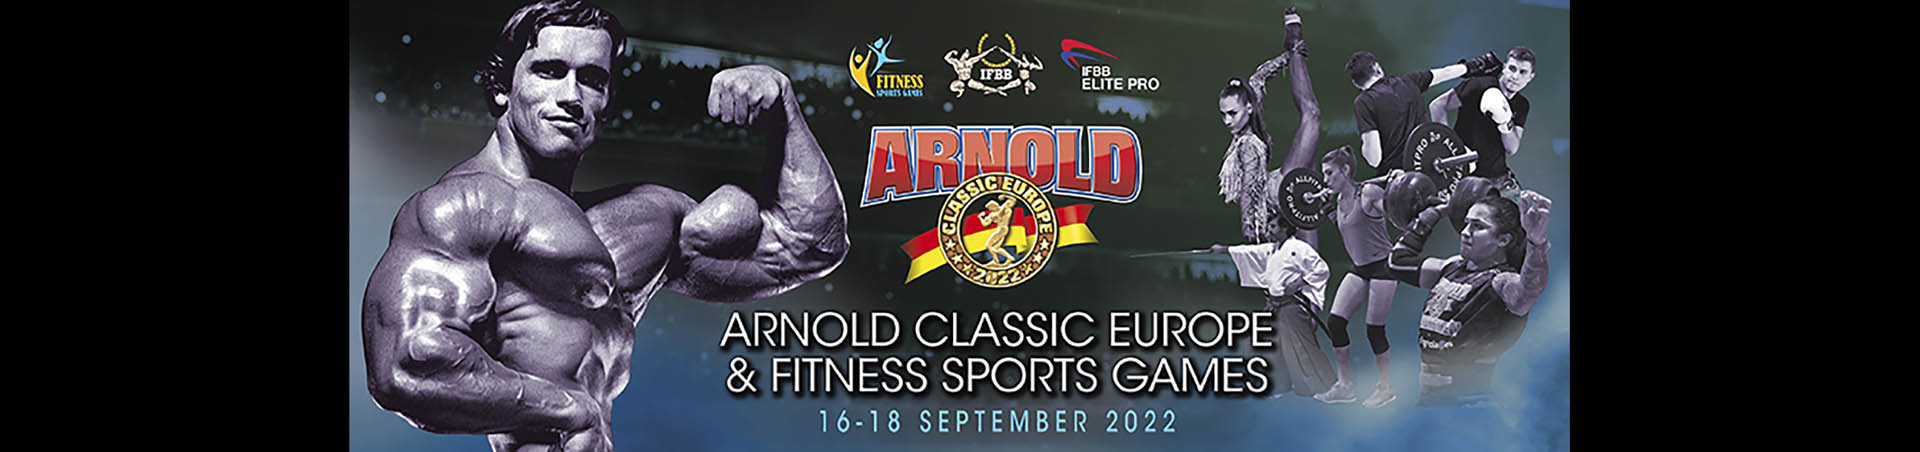 ARNOLD CLASSIC EUROPE FITNESS SPORTS GAMES